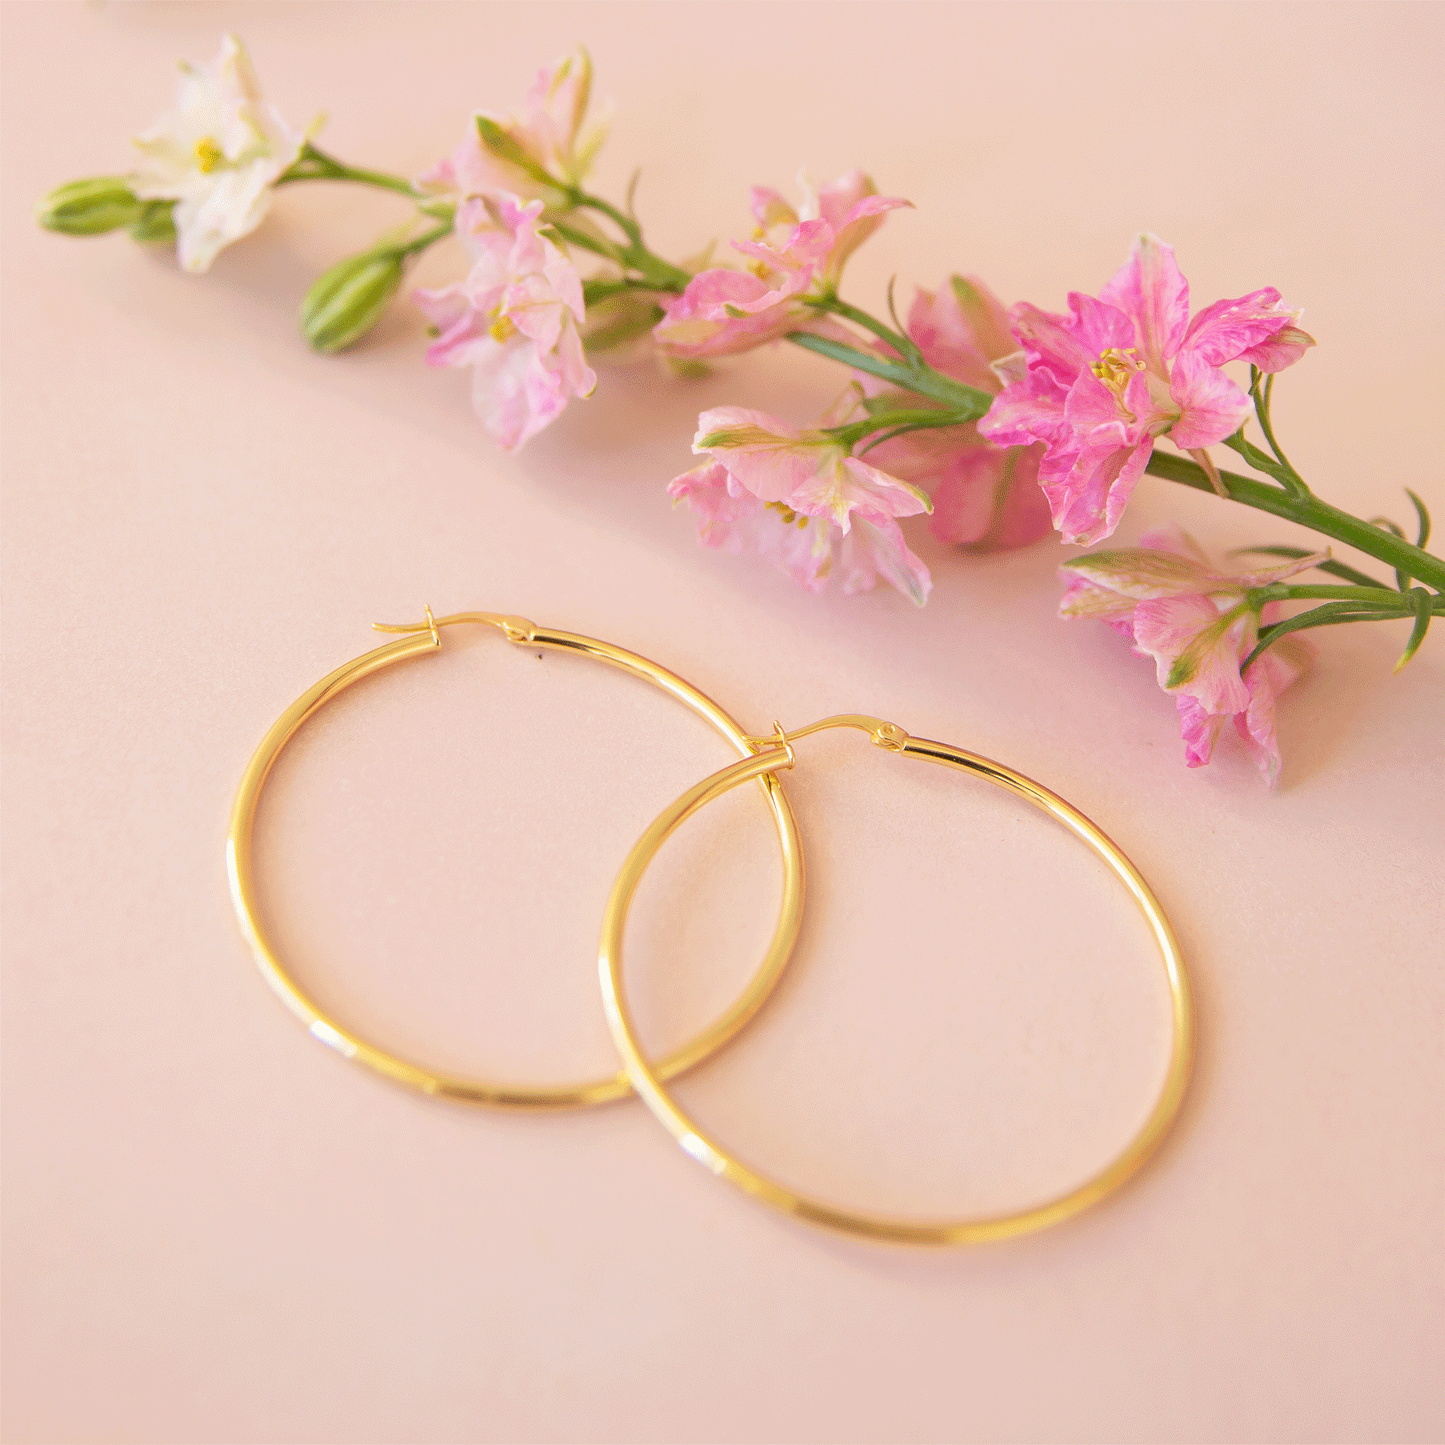 On a tan background is a pair of thin gold hoop earrings next to a stem of pink flowers.